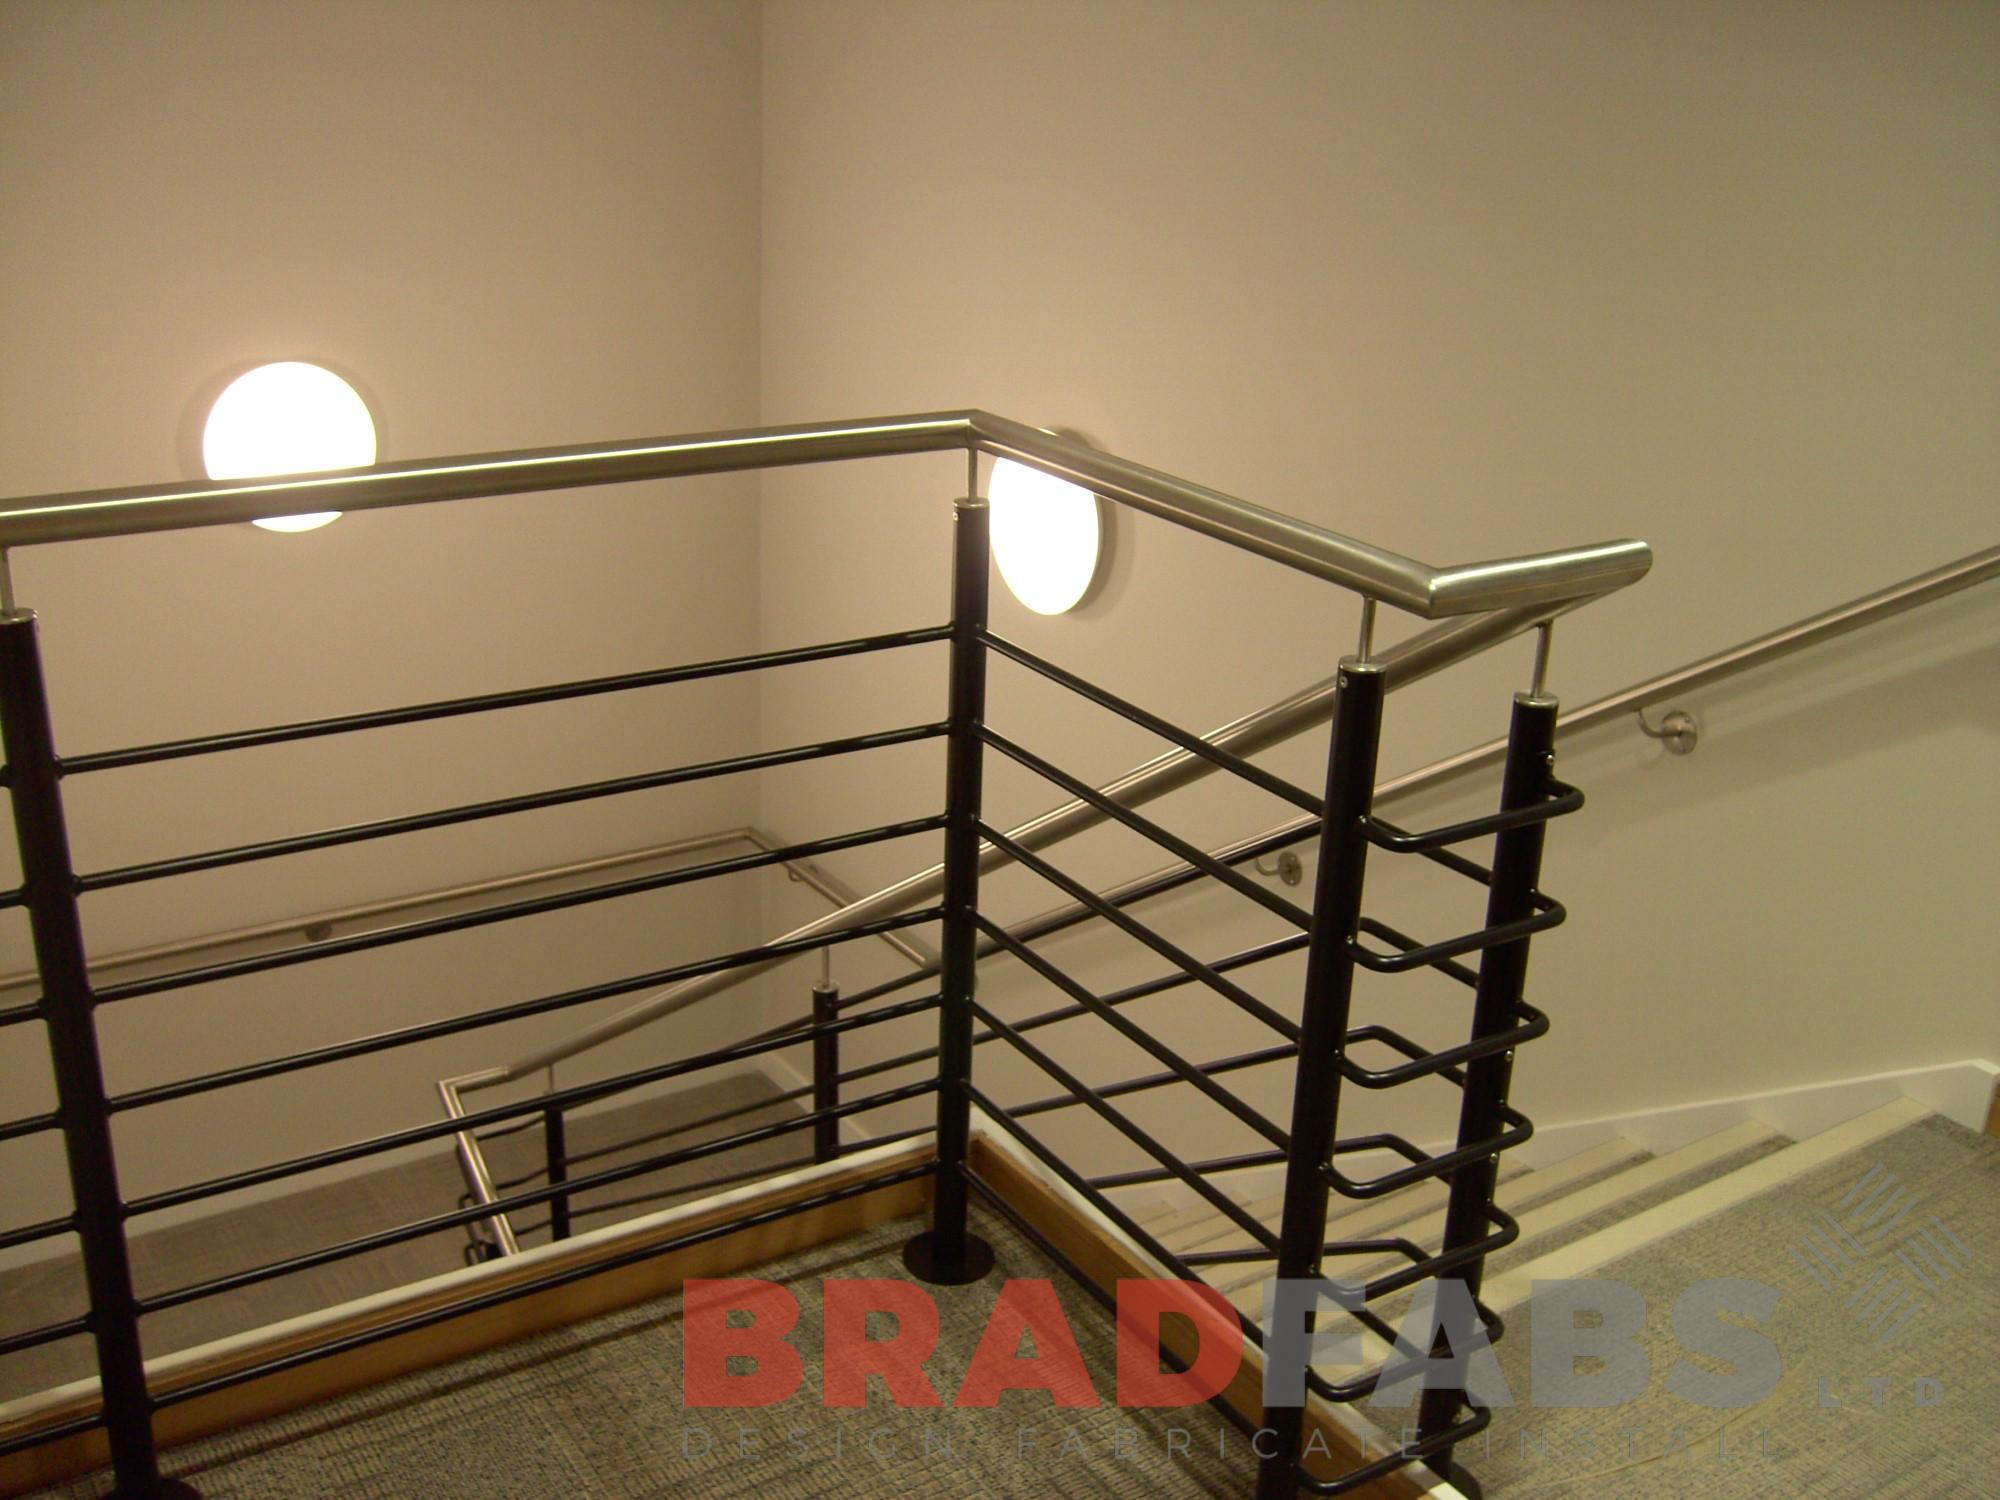 BRADFABS manufactured this balustrade for a staircase within a hospital.